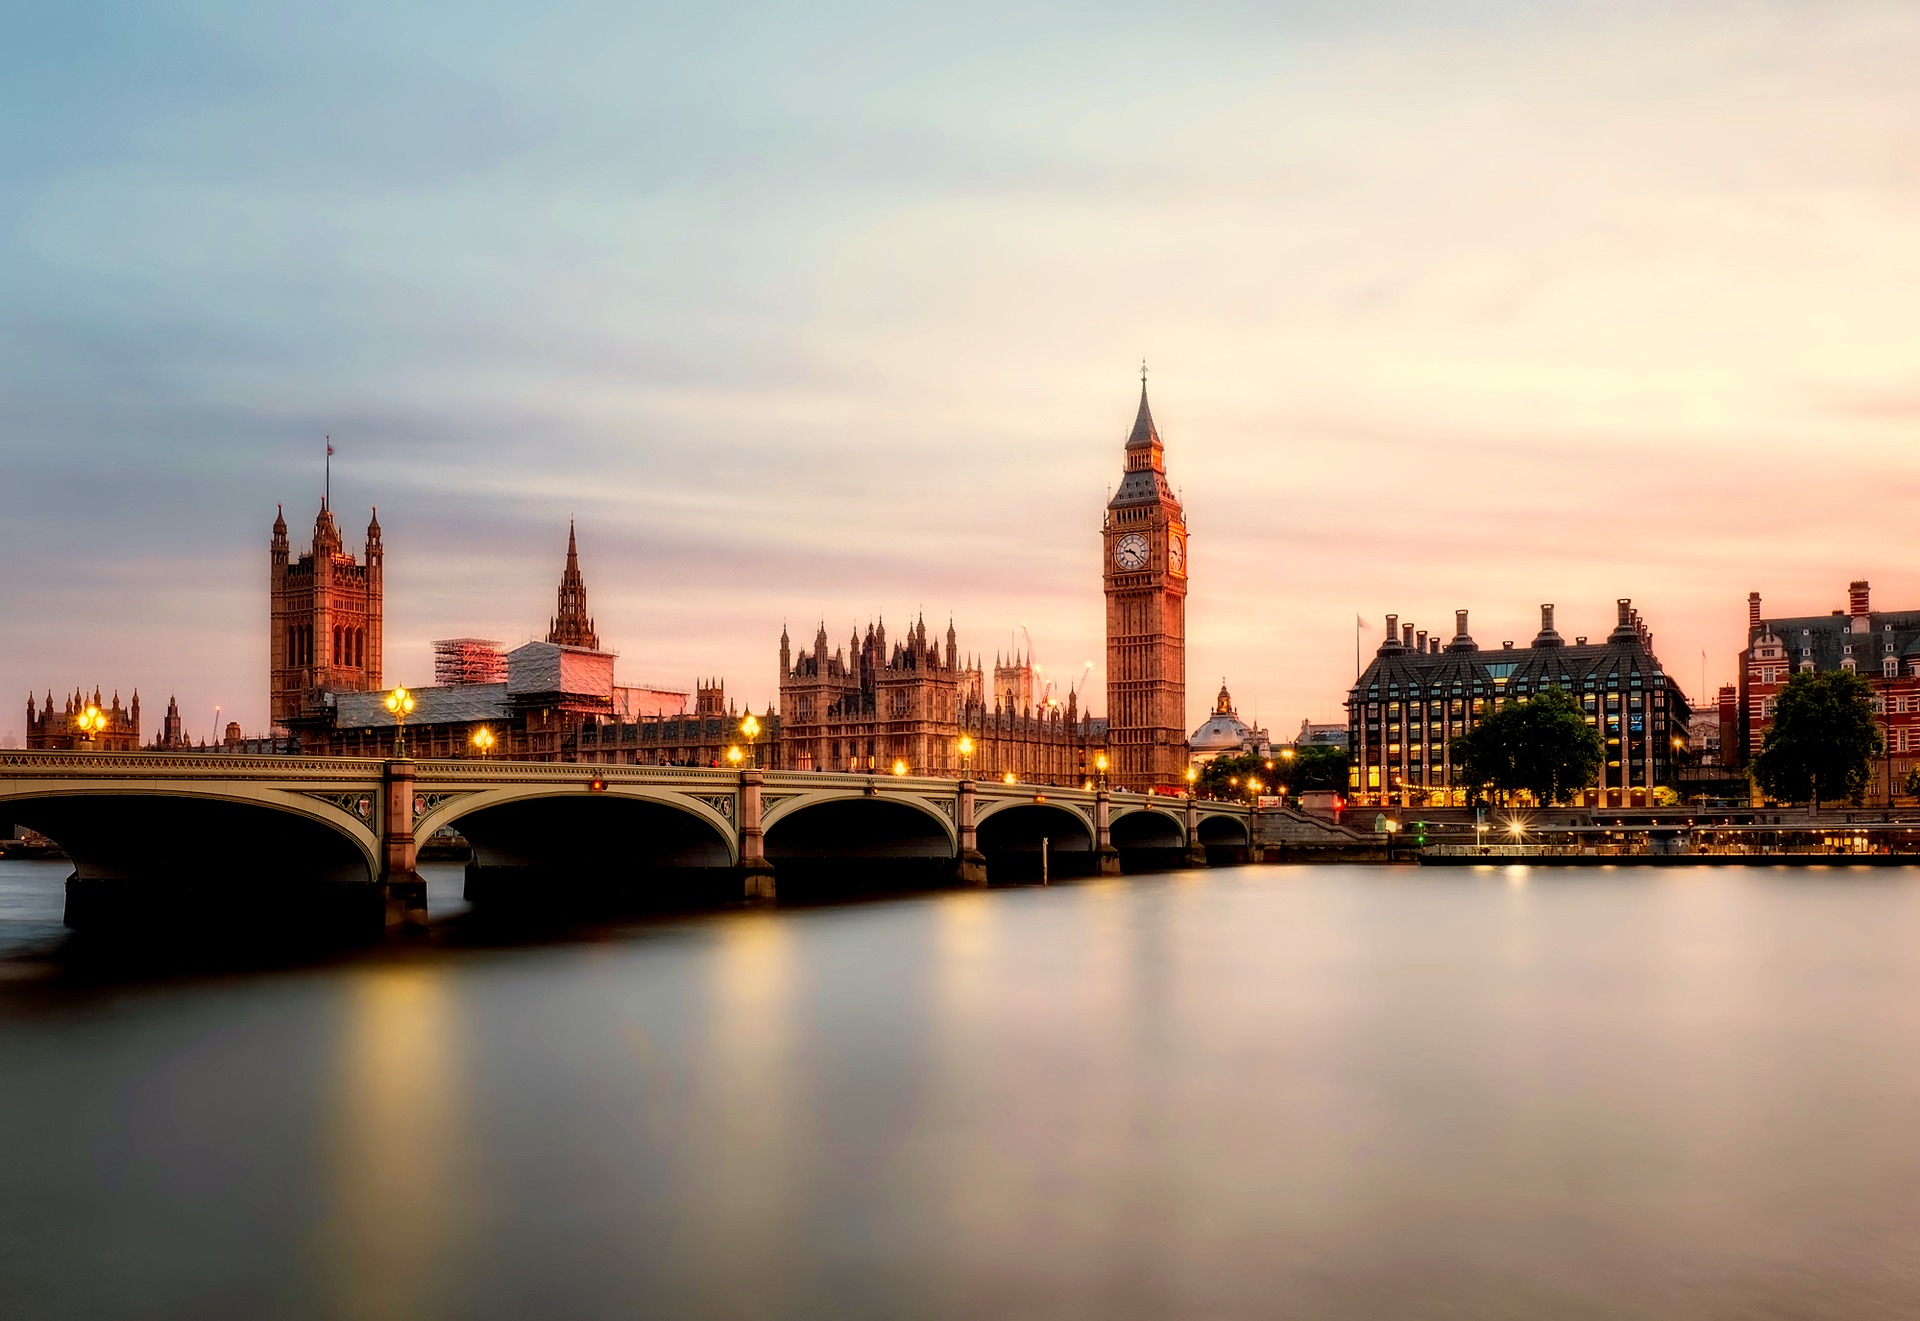 Delivering AV & LV Solutions for Multi-Purpose Spaces in Westminster